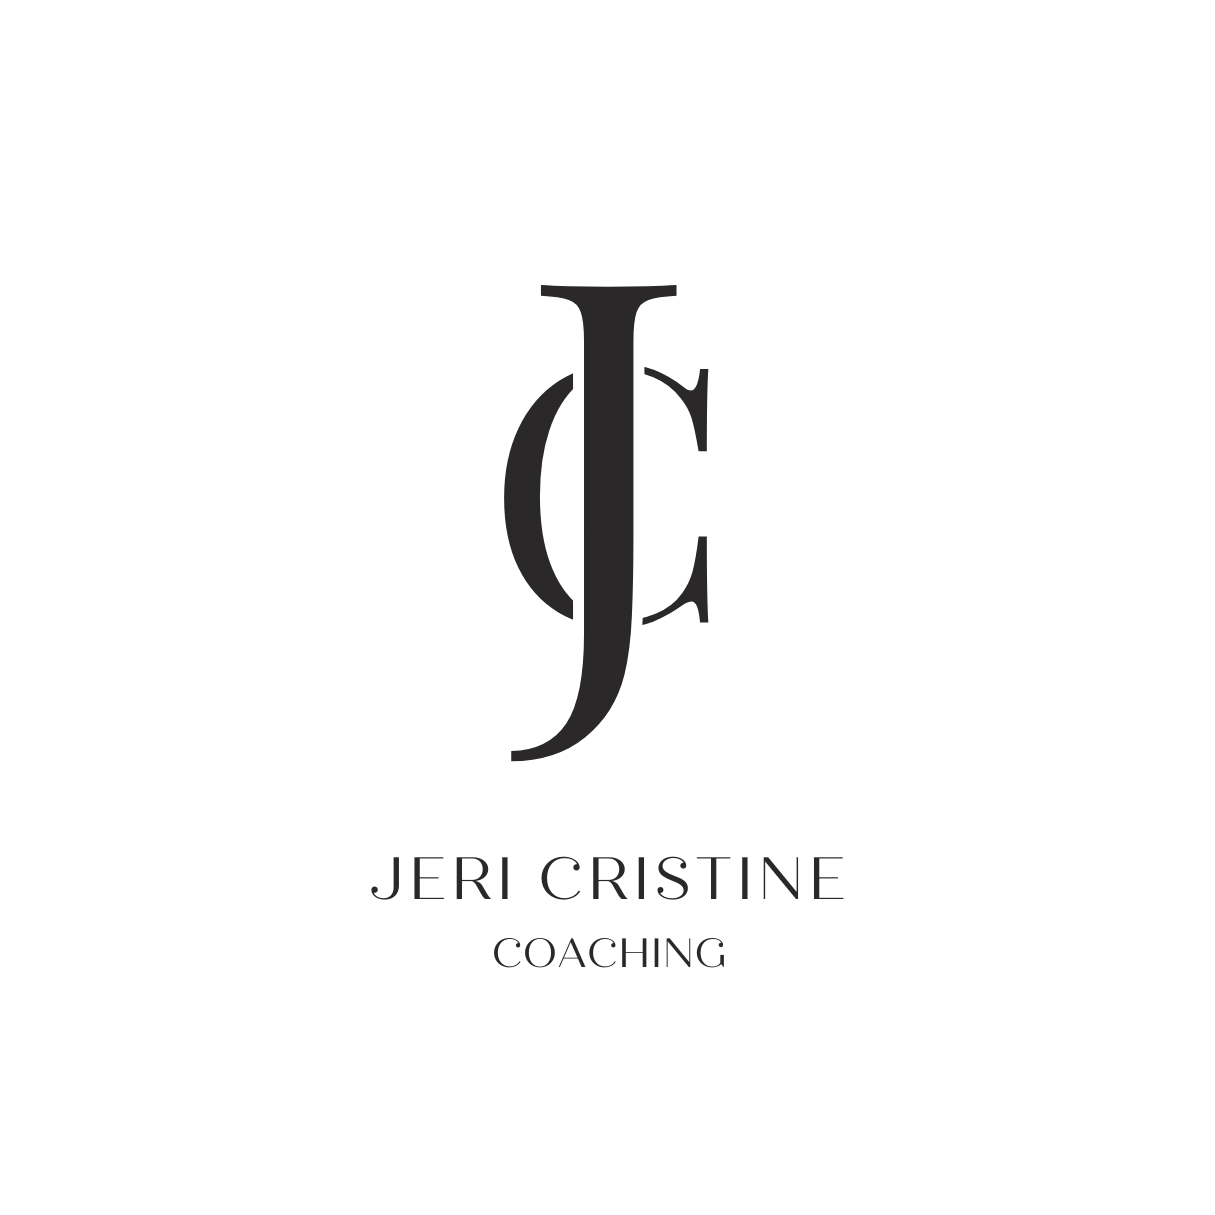 Timber Creek Virtual is providing a Virtual Personal Assistant for Jeri Cristine